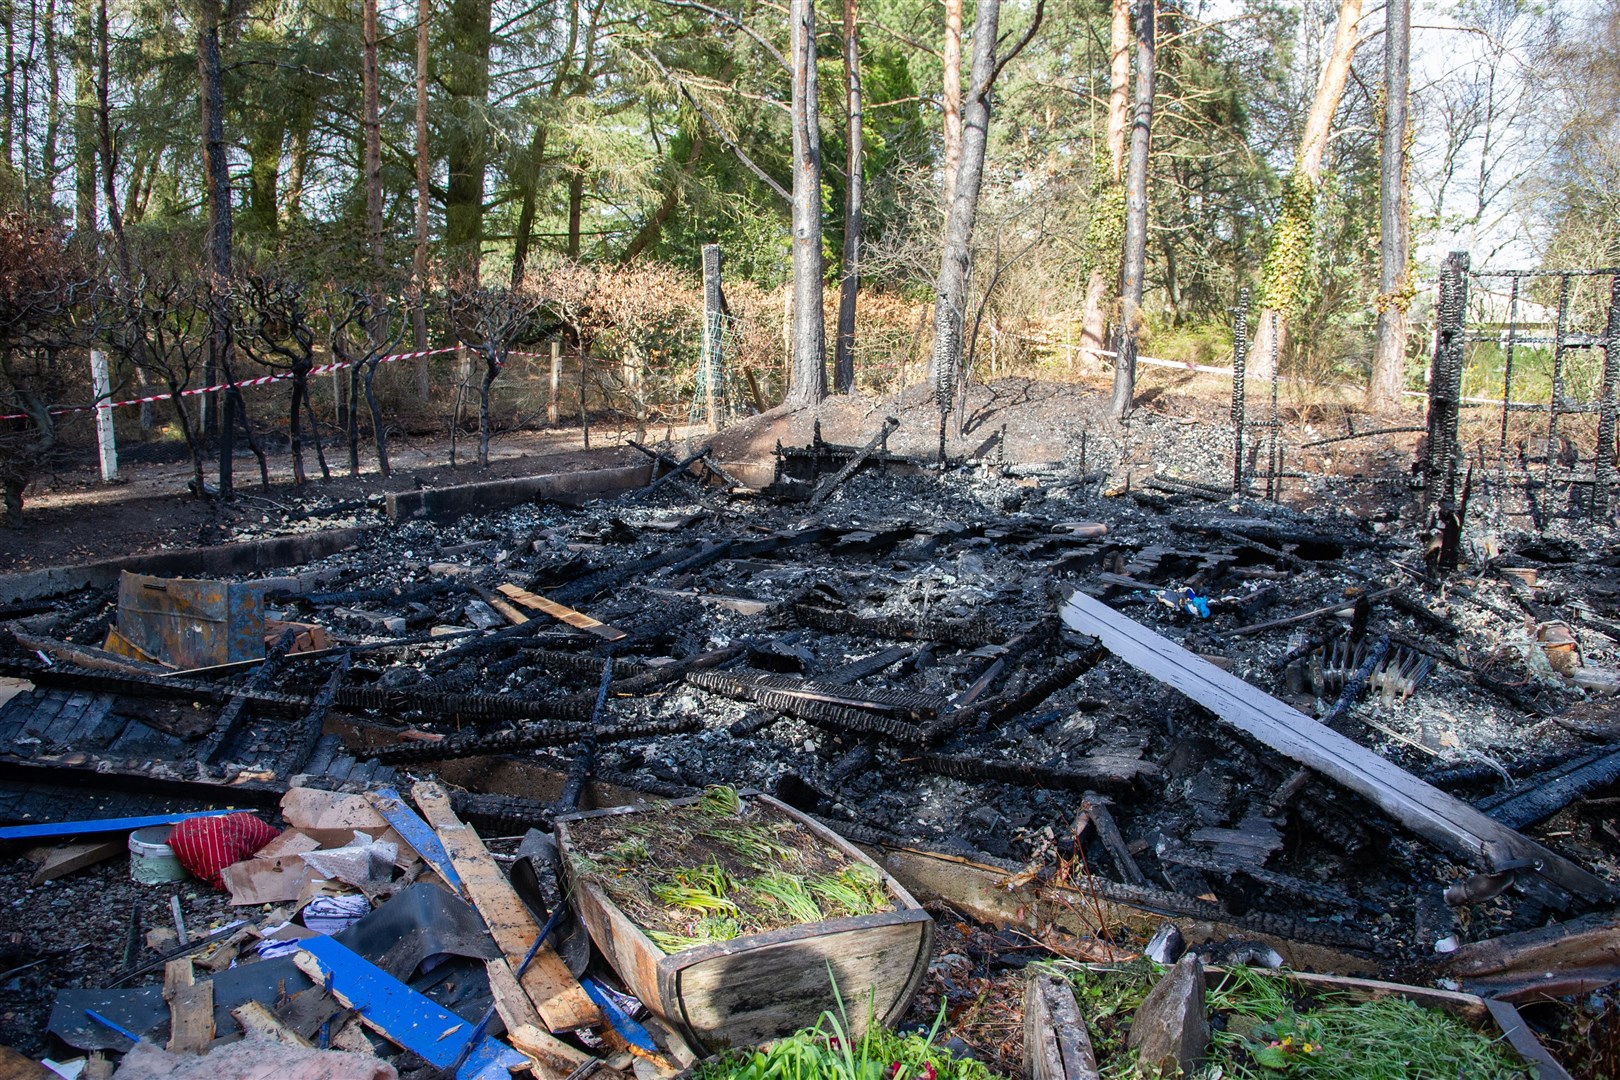 The Sanctuary was also destroyed by the blaze. Picture: Daniel Forsyth